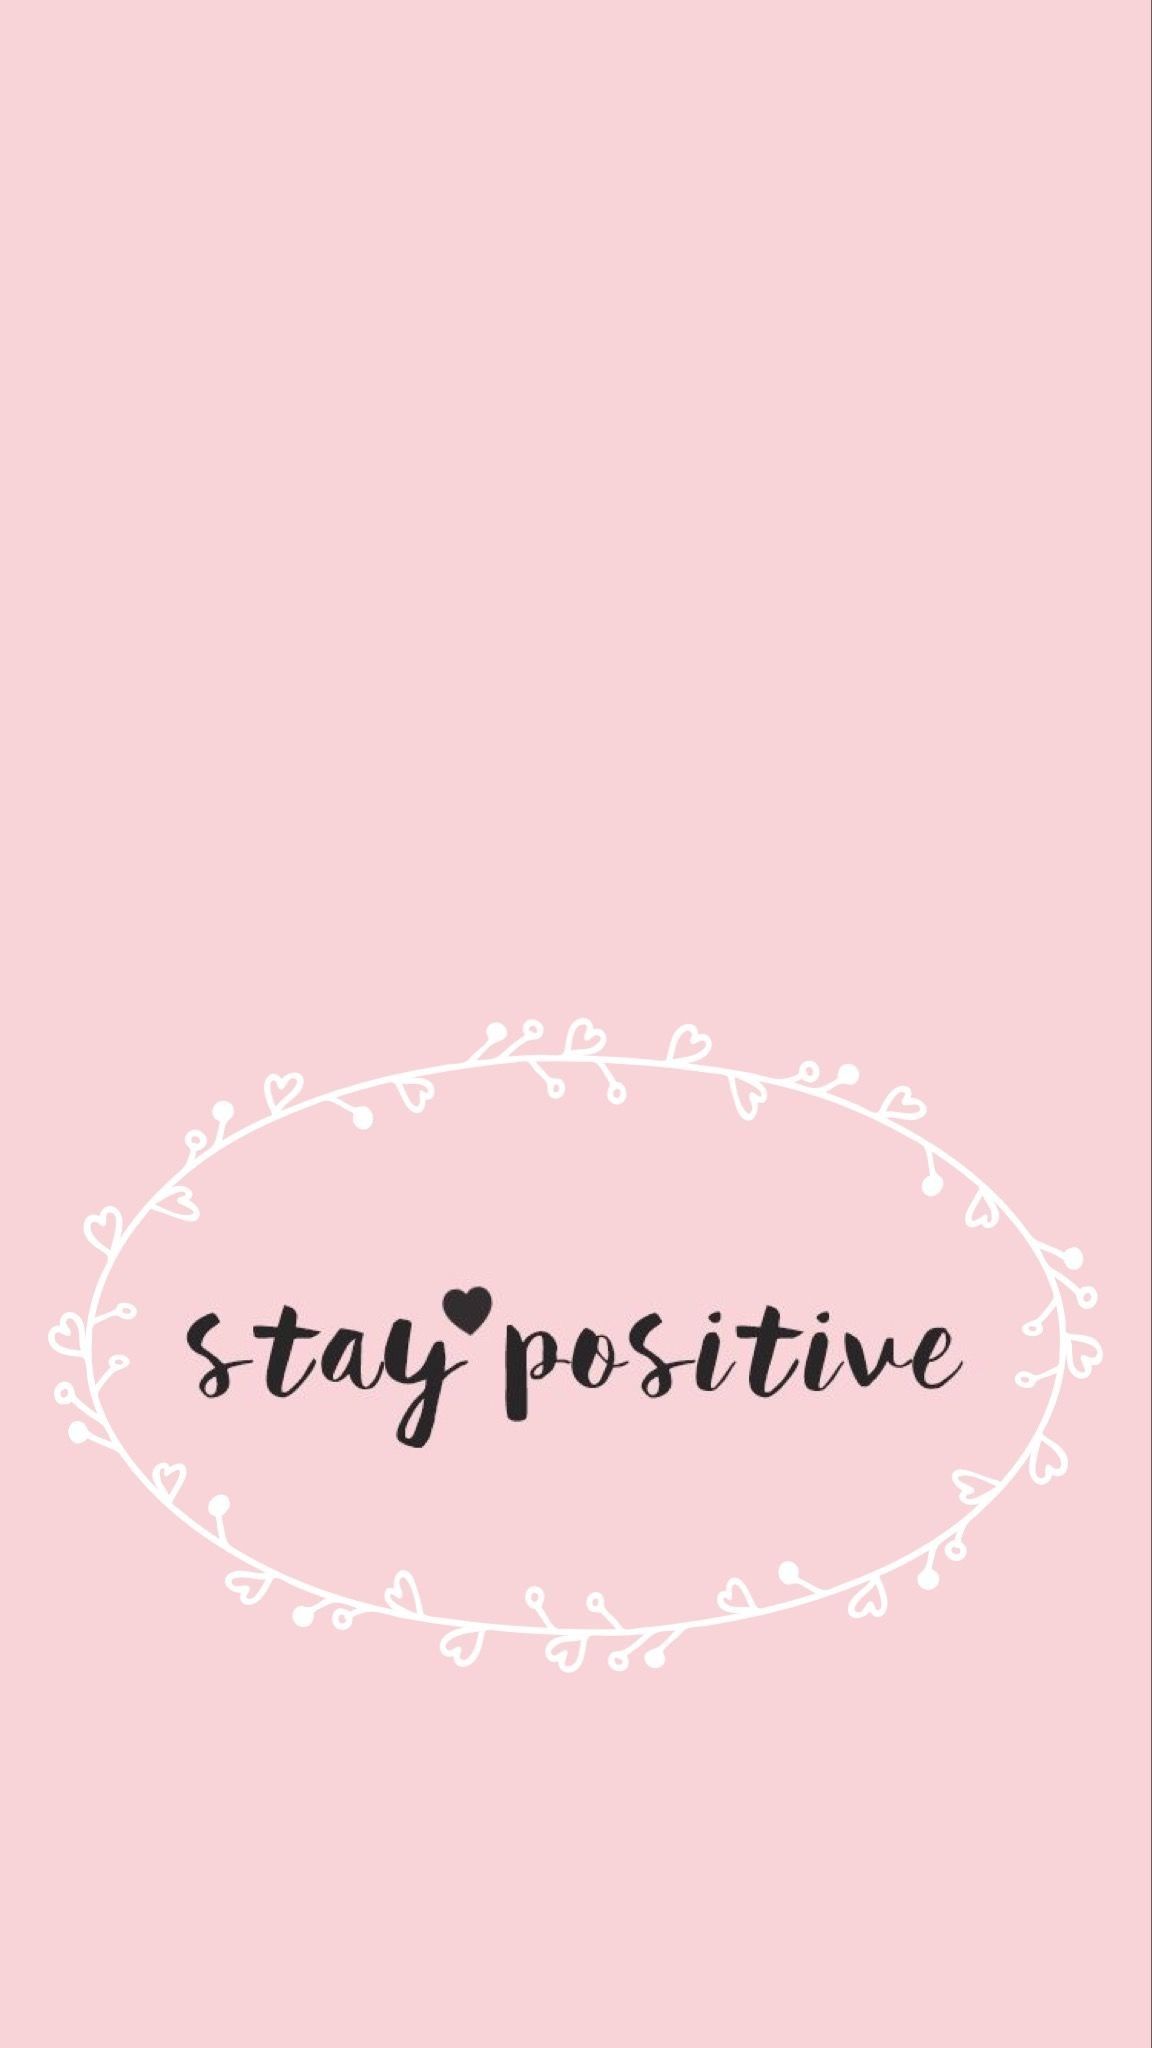 Aesthetic Motivational Wallpapers